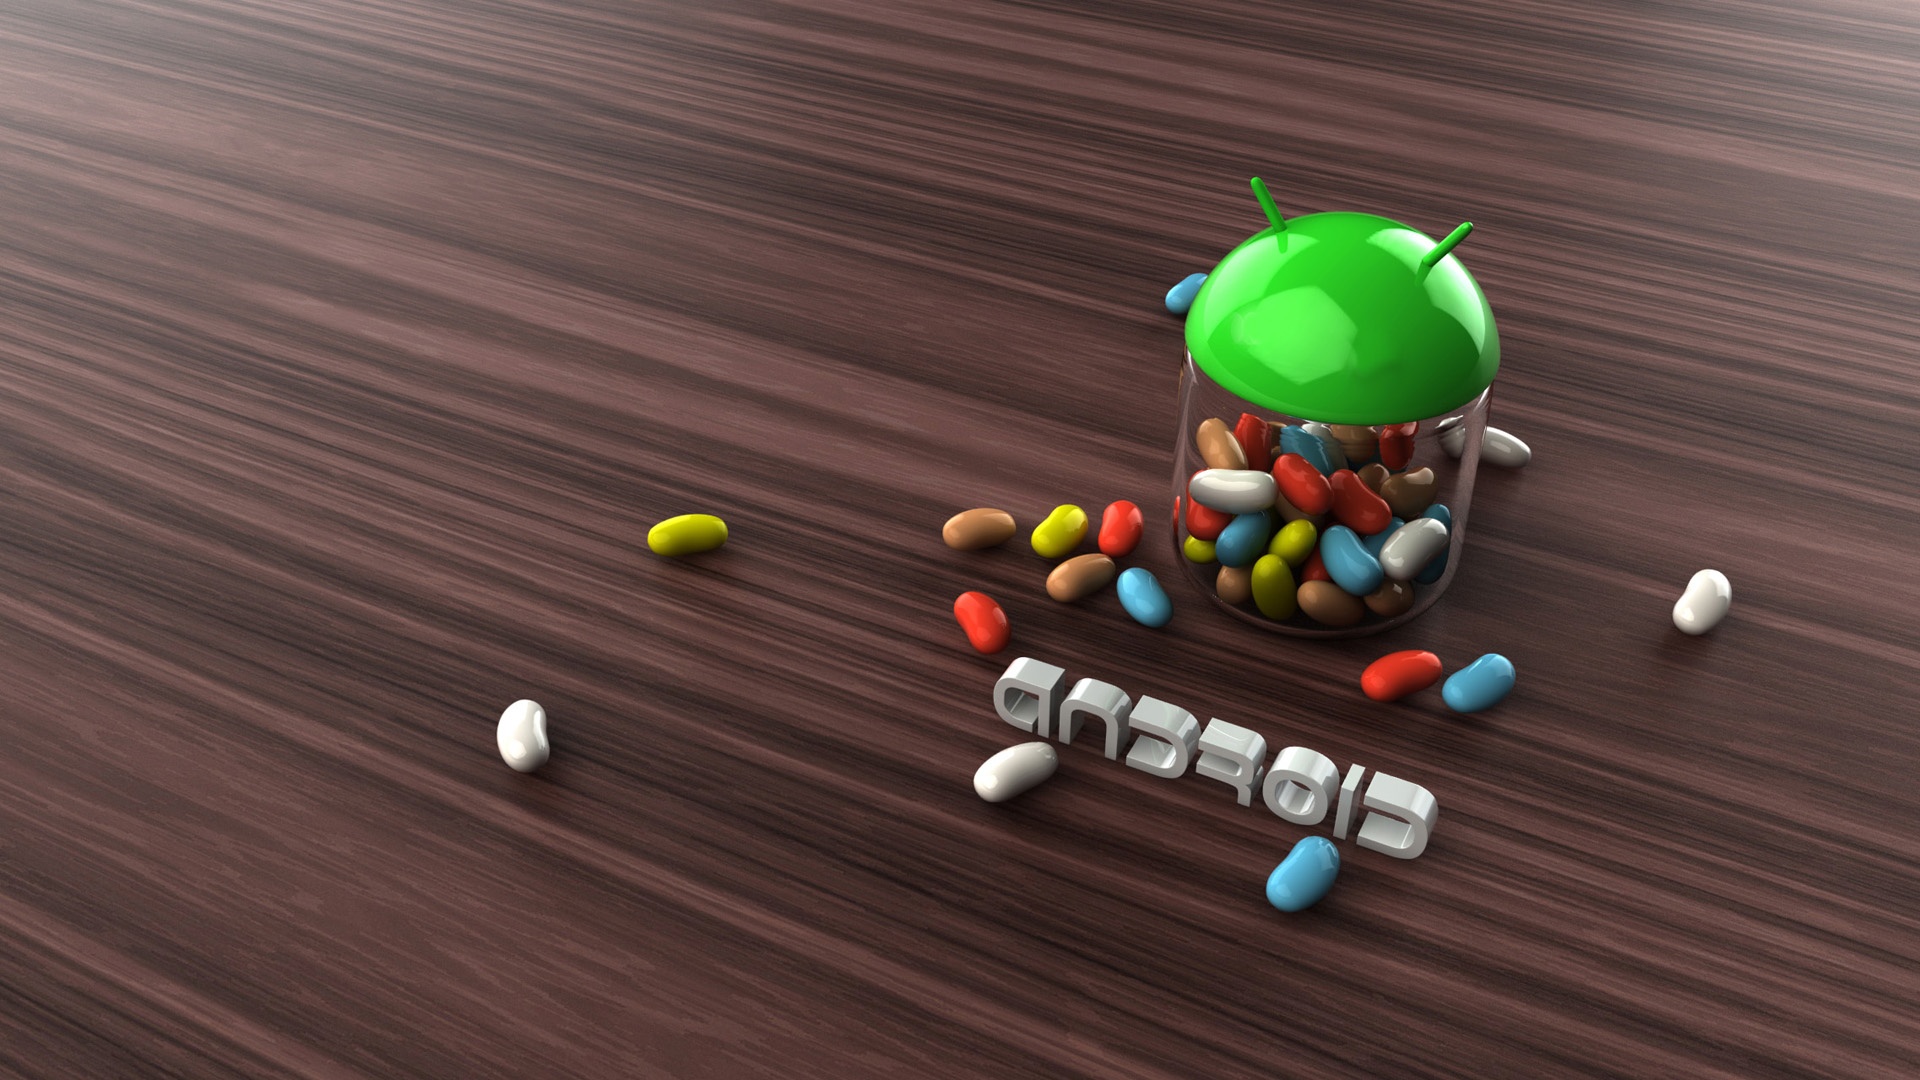 Android Jelly Bean Wallpaper High Resolution